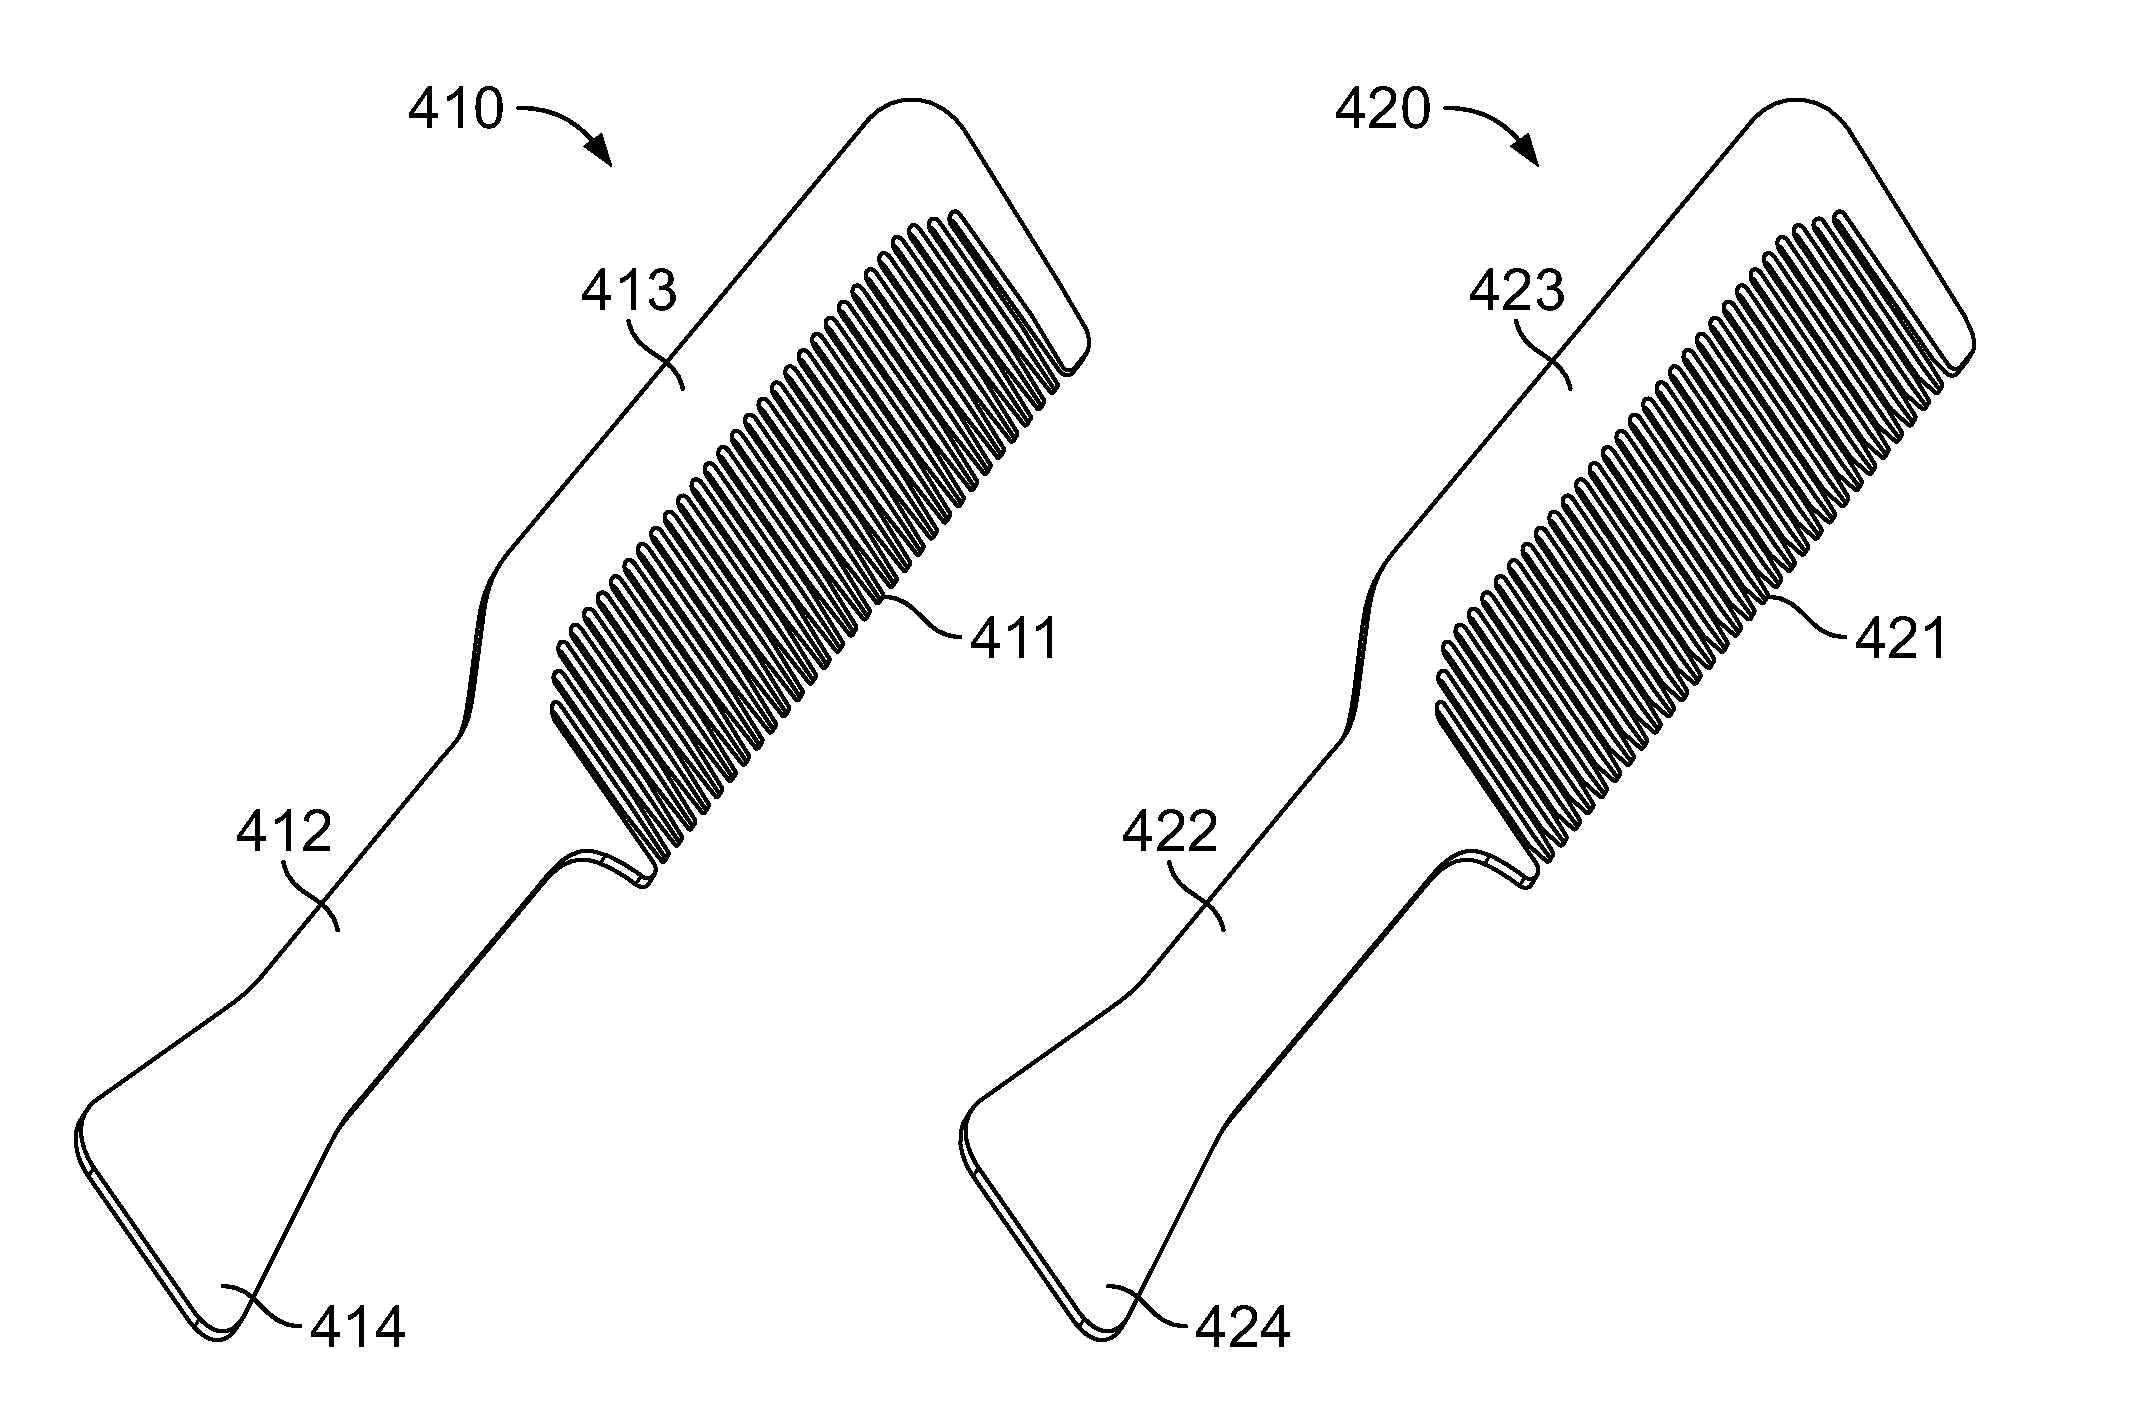 Apparatus and method for cutting hair